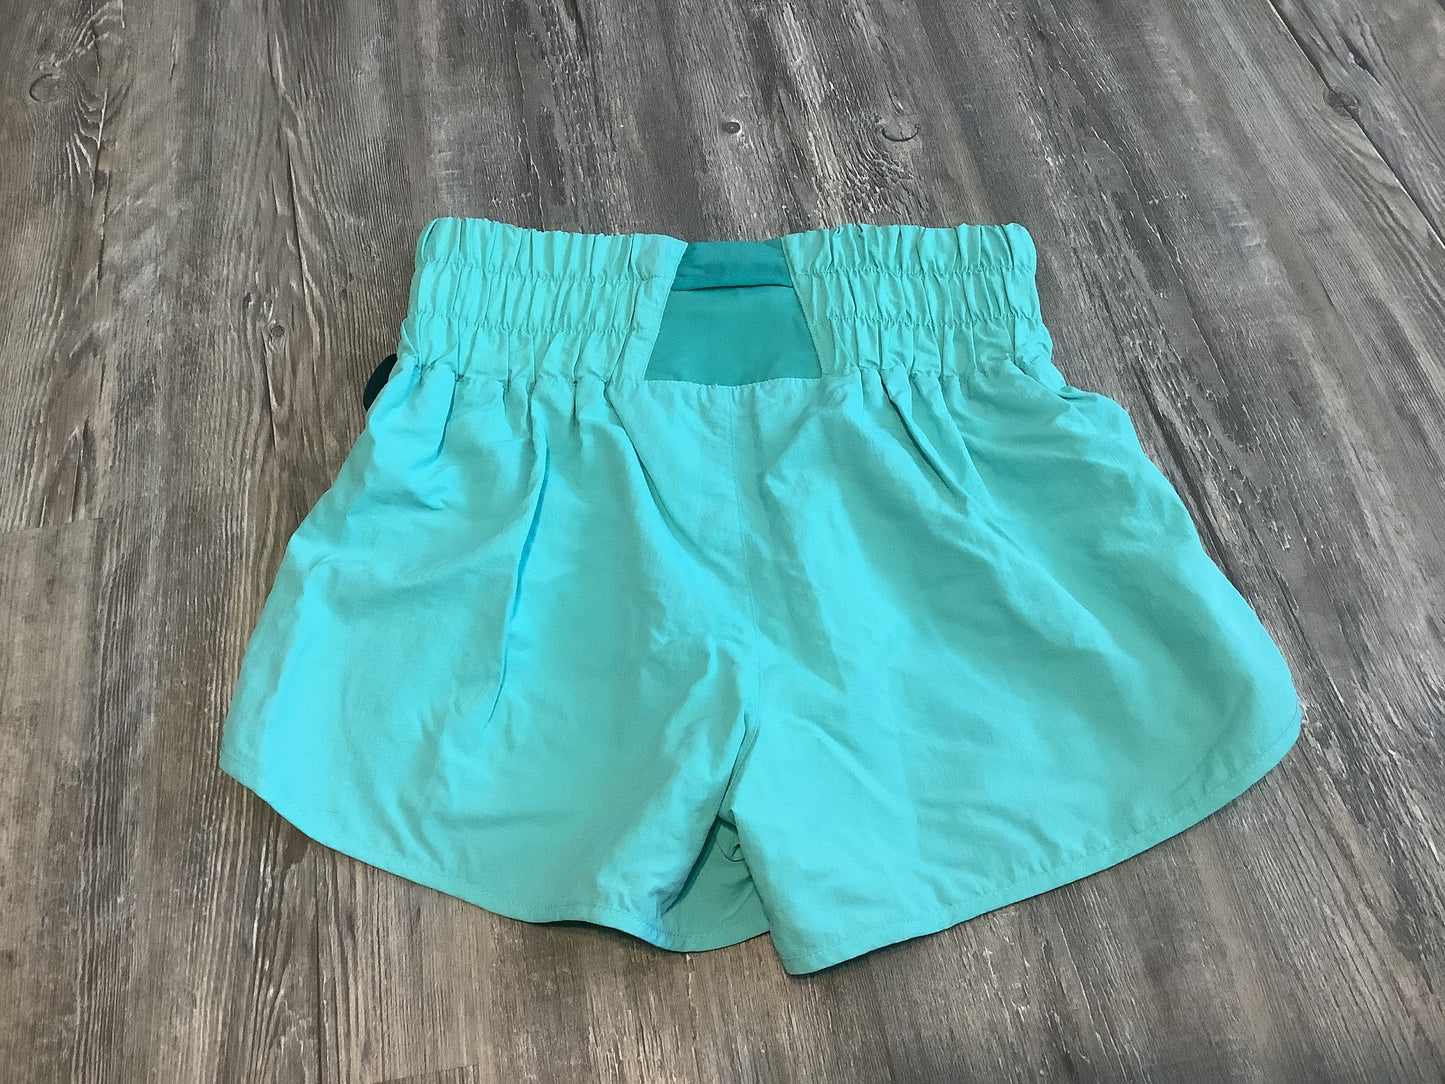 Teal Shorts Zenana Outfitters, Size M